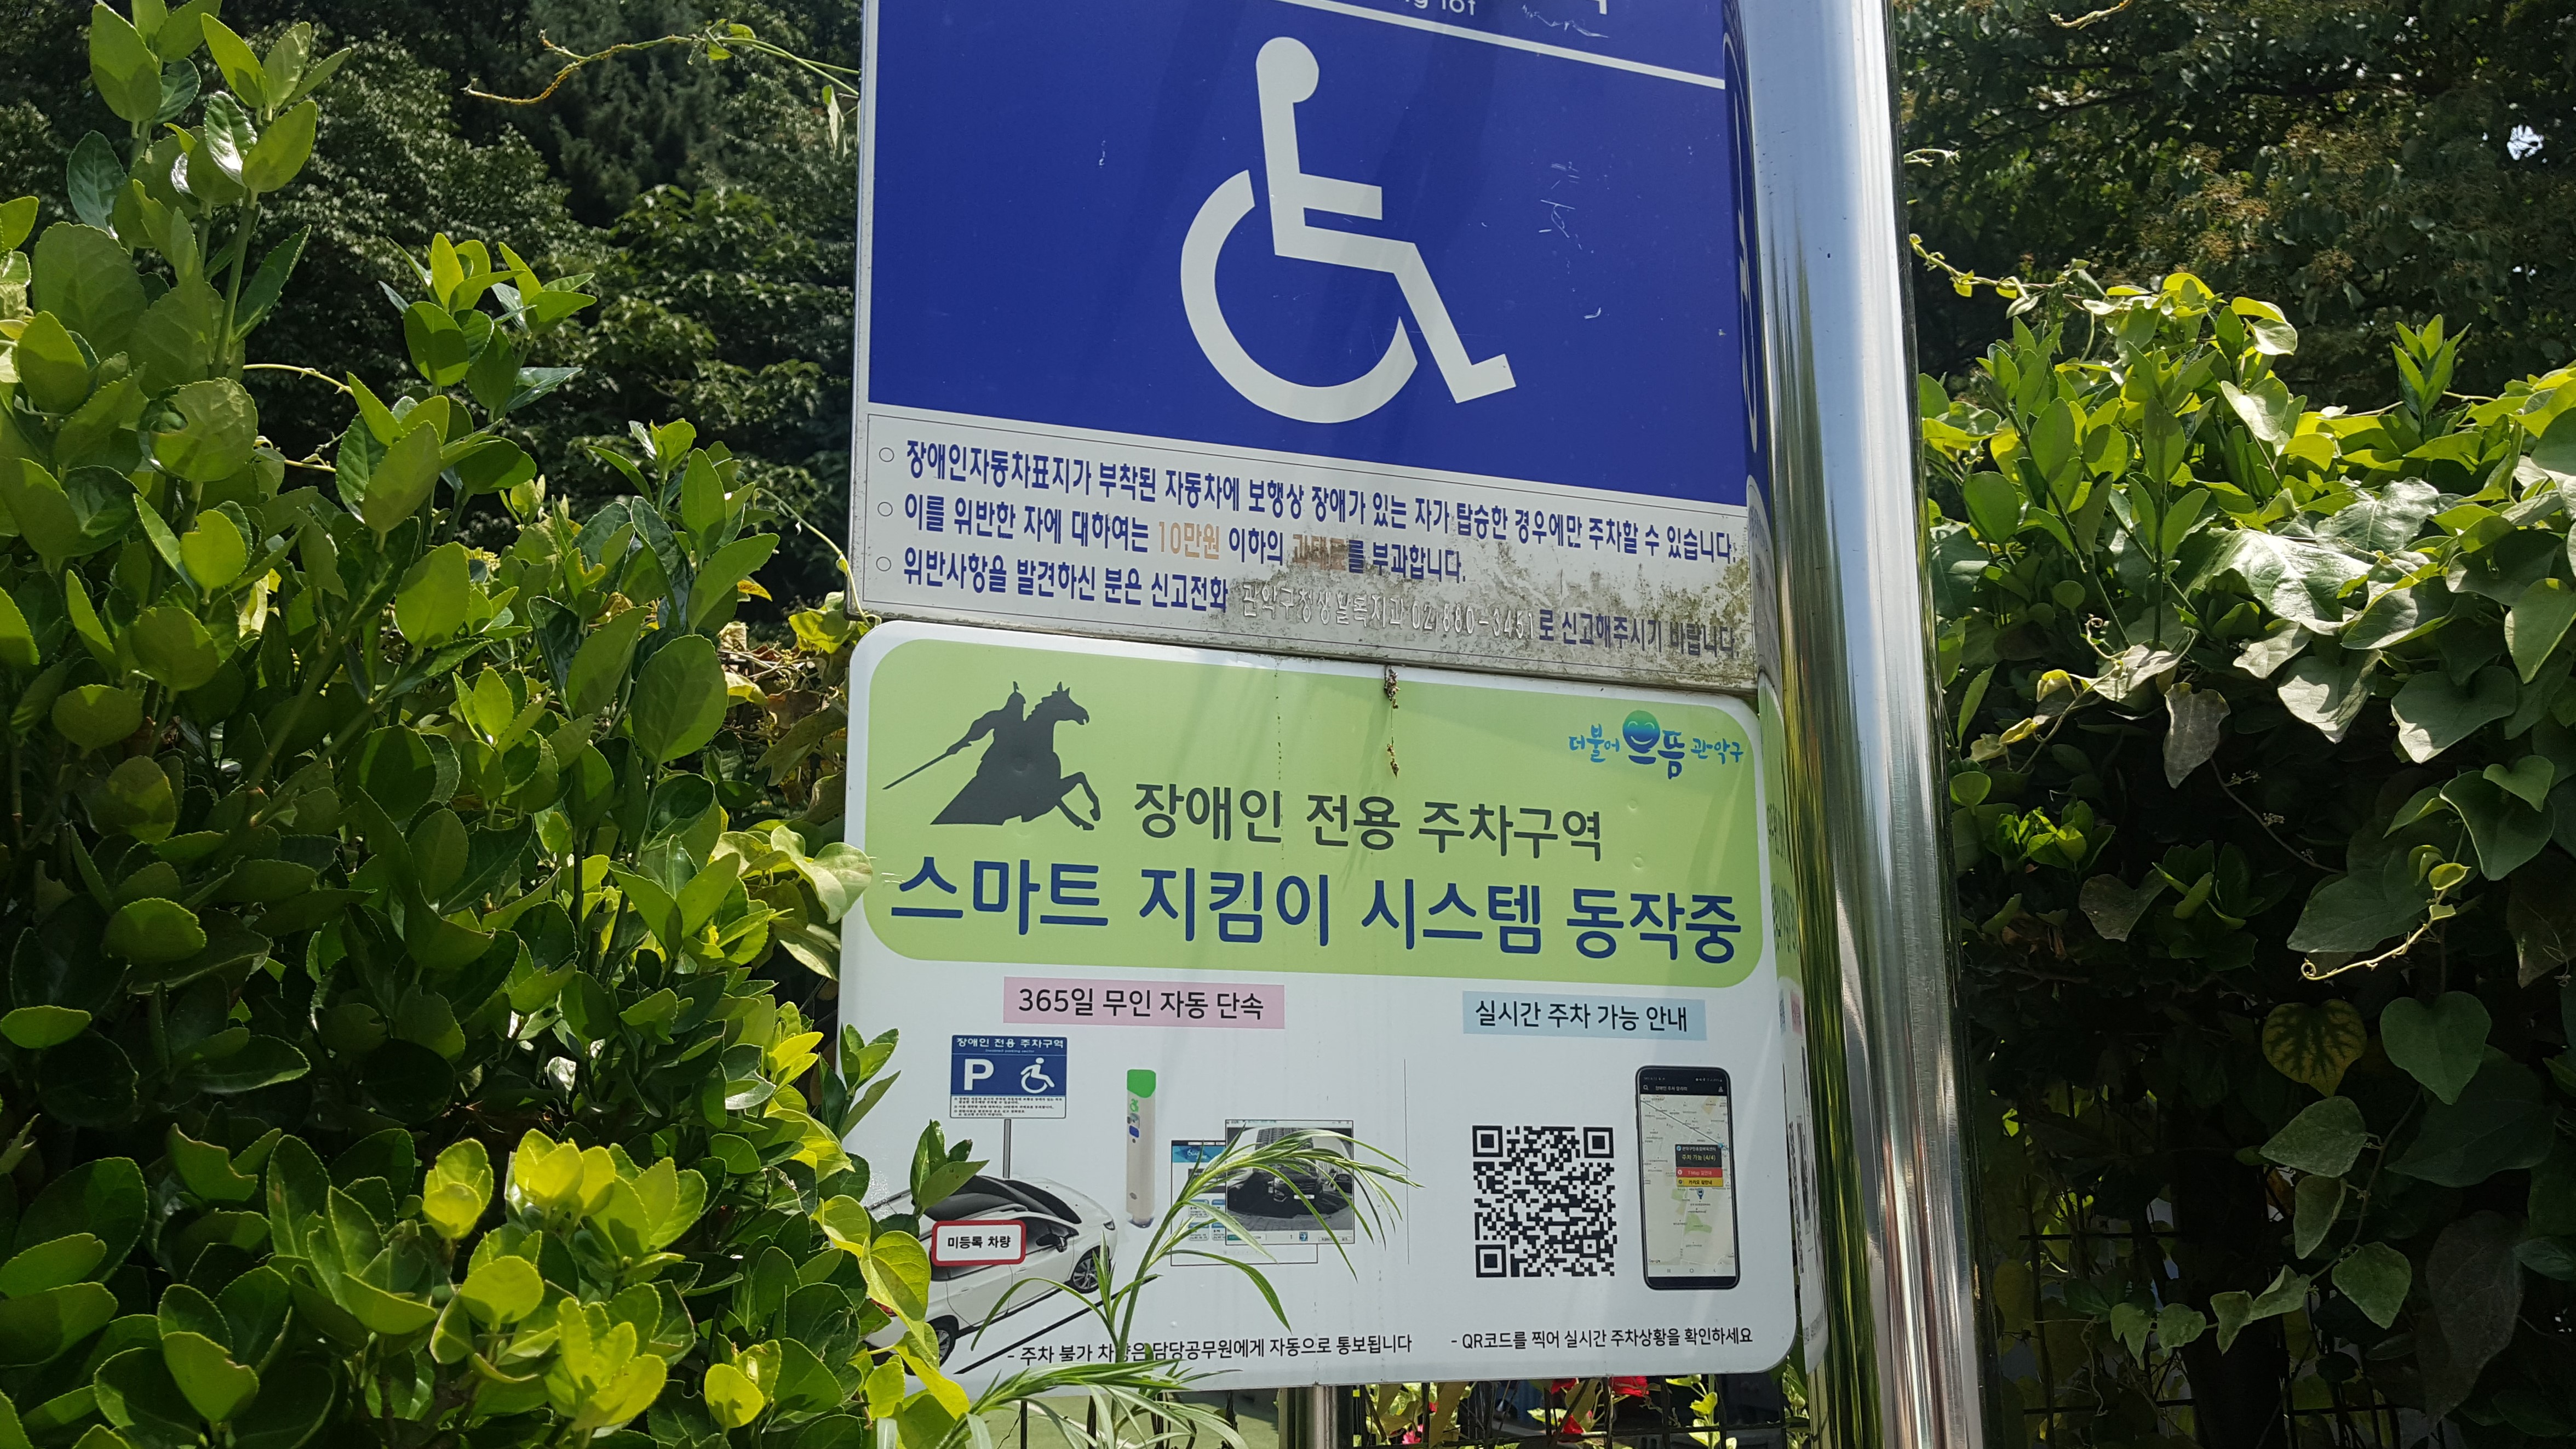 Parking lot0 : Information board on the accessible parking lots in Nakseoungdae Park